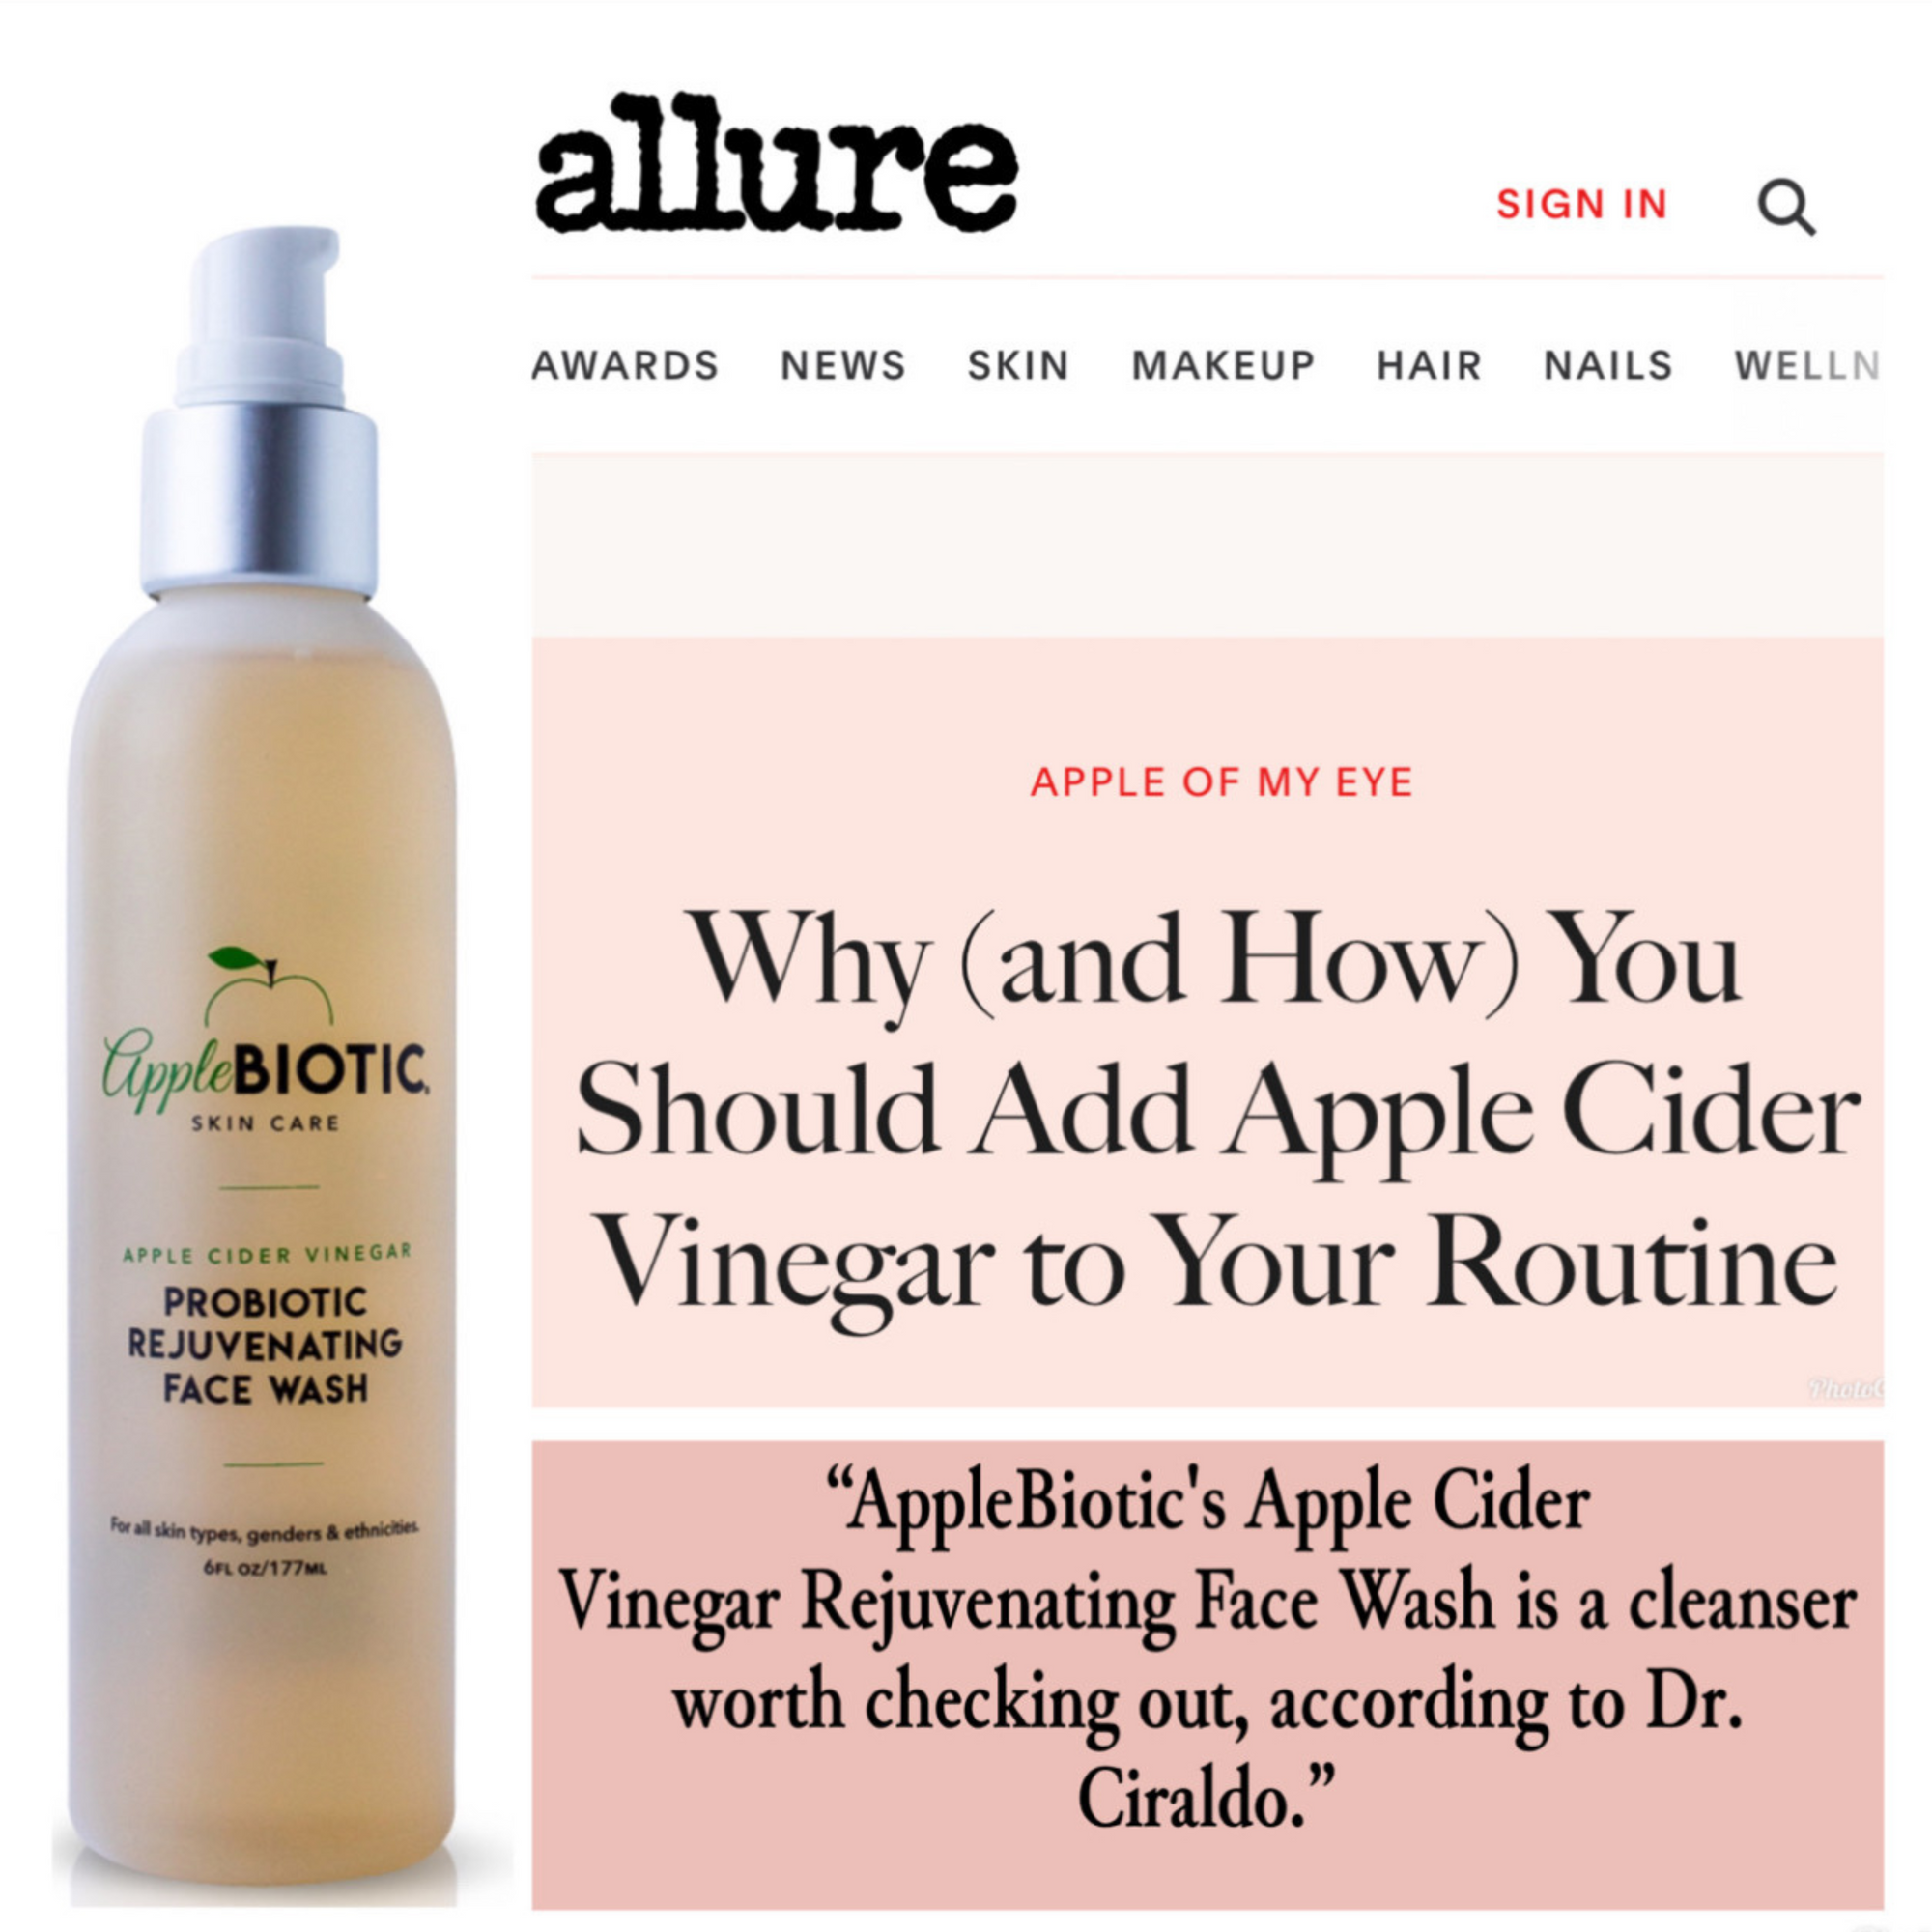 Our ACV Face Wash was featured on Allure.com!